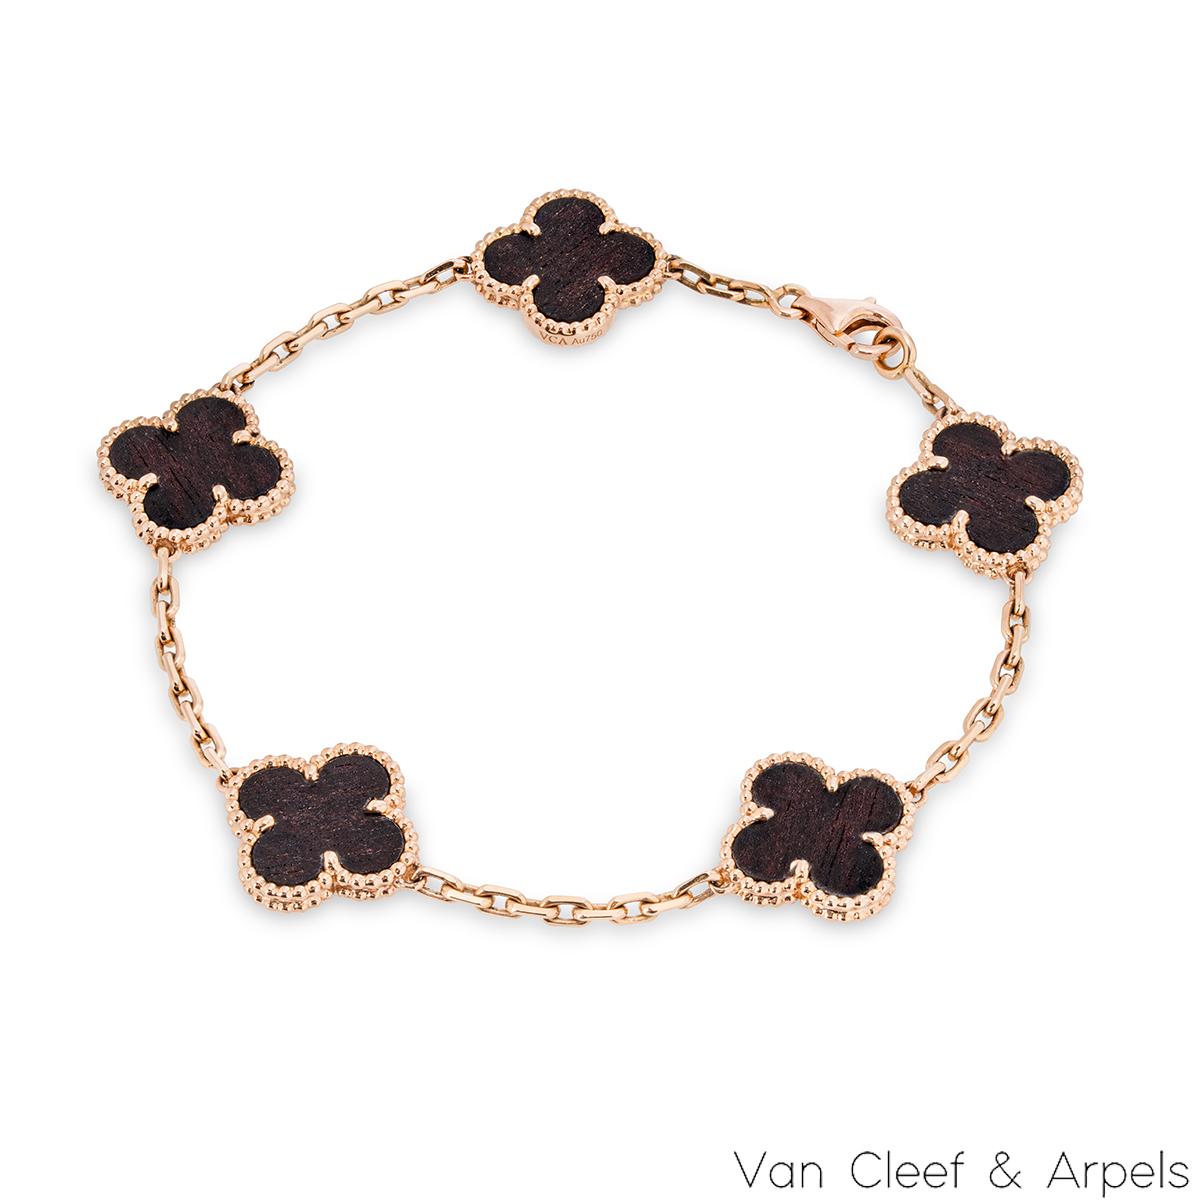 A limited edition letterwood Vintage Alhambra bracelet by Van Cleef & Arpels. The bracelet features 5 iconic 4 leaf clover motifs, each set with a beaded edge and a letterwood inlay, set throughout the length of the chain. The bracelet measures 7.5